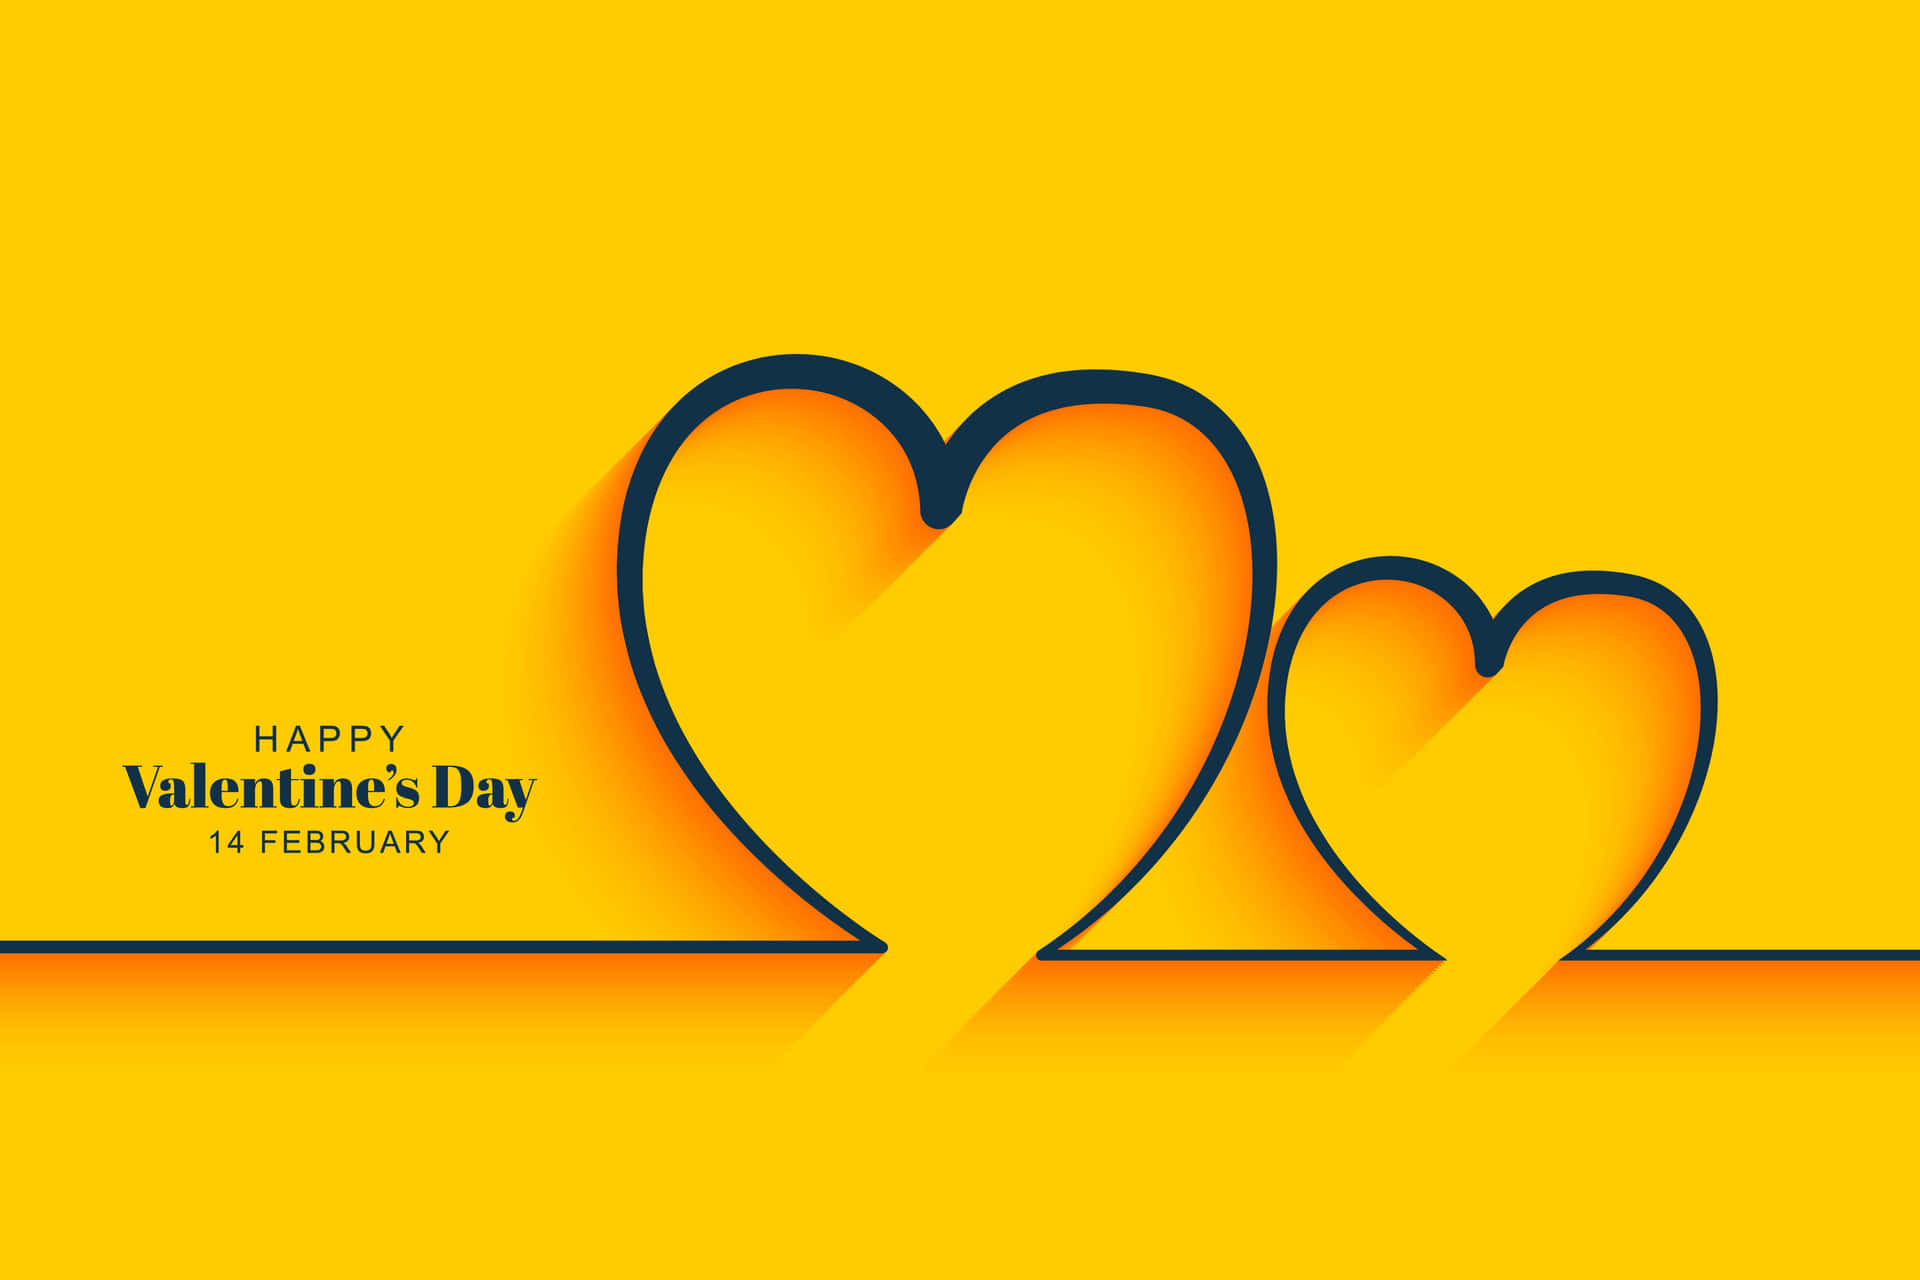 Two Hearts On A Yellow Background